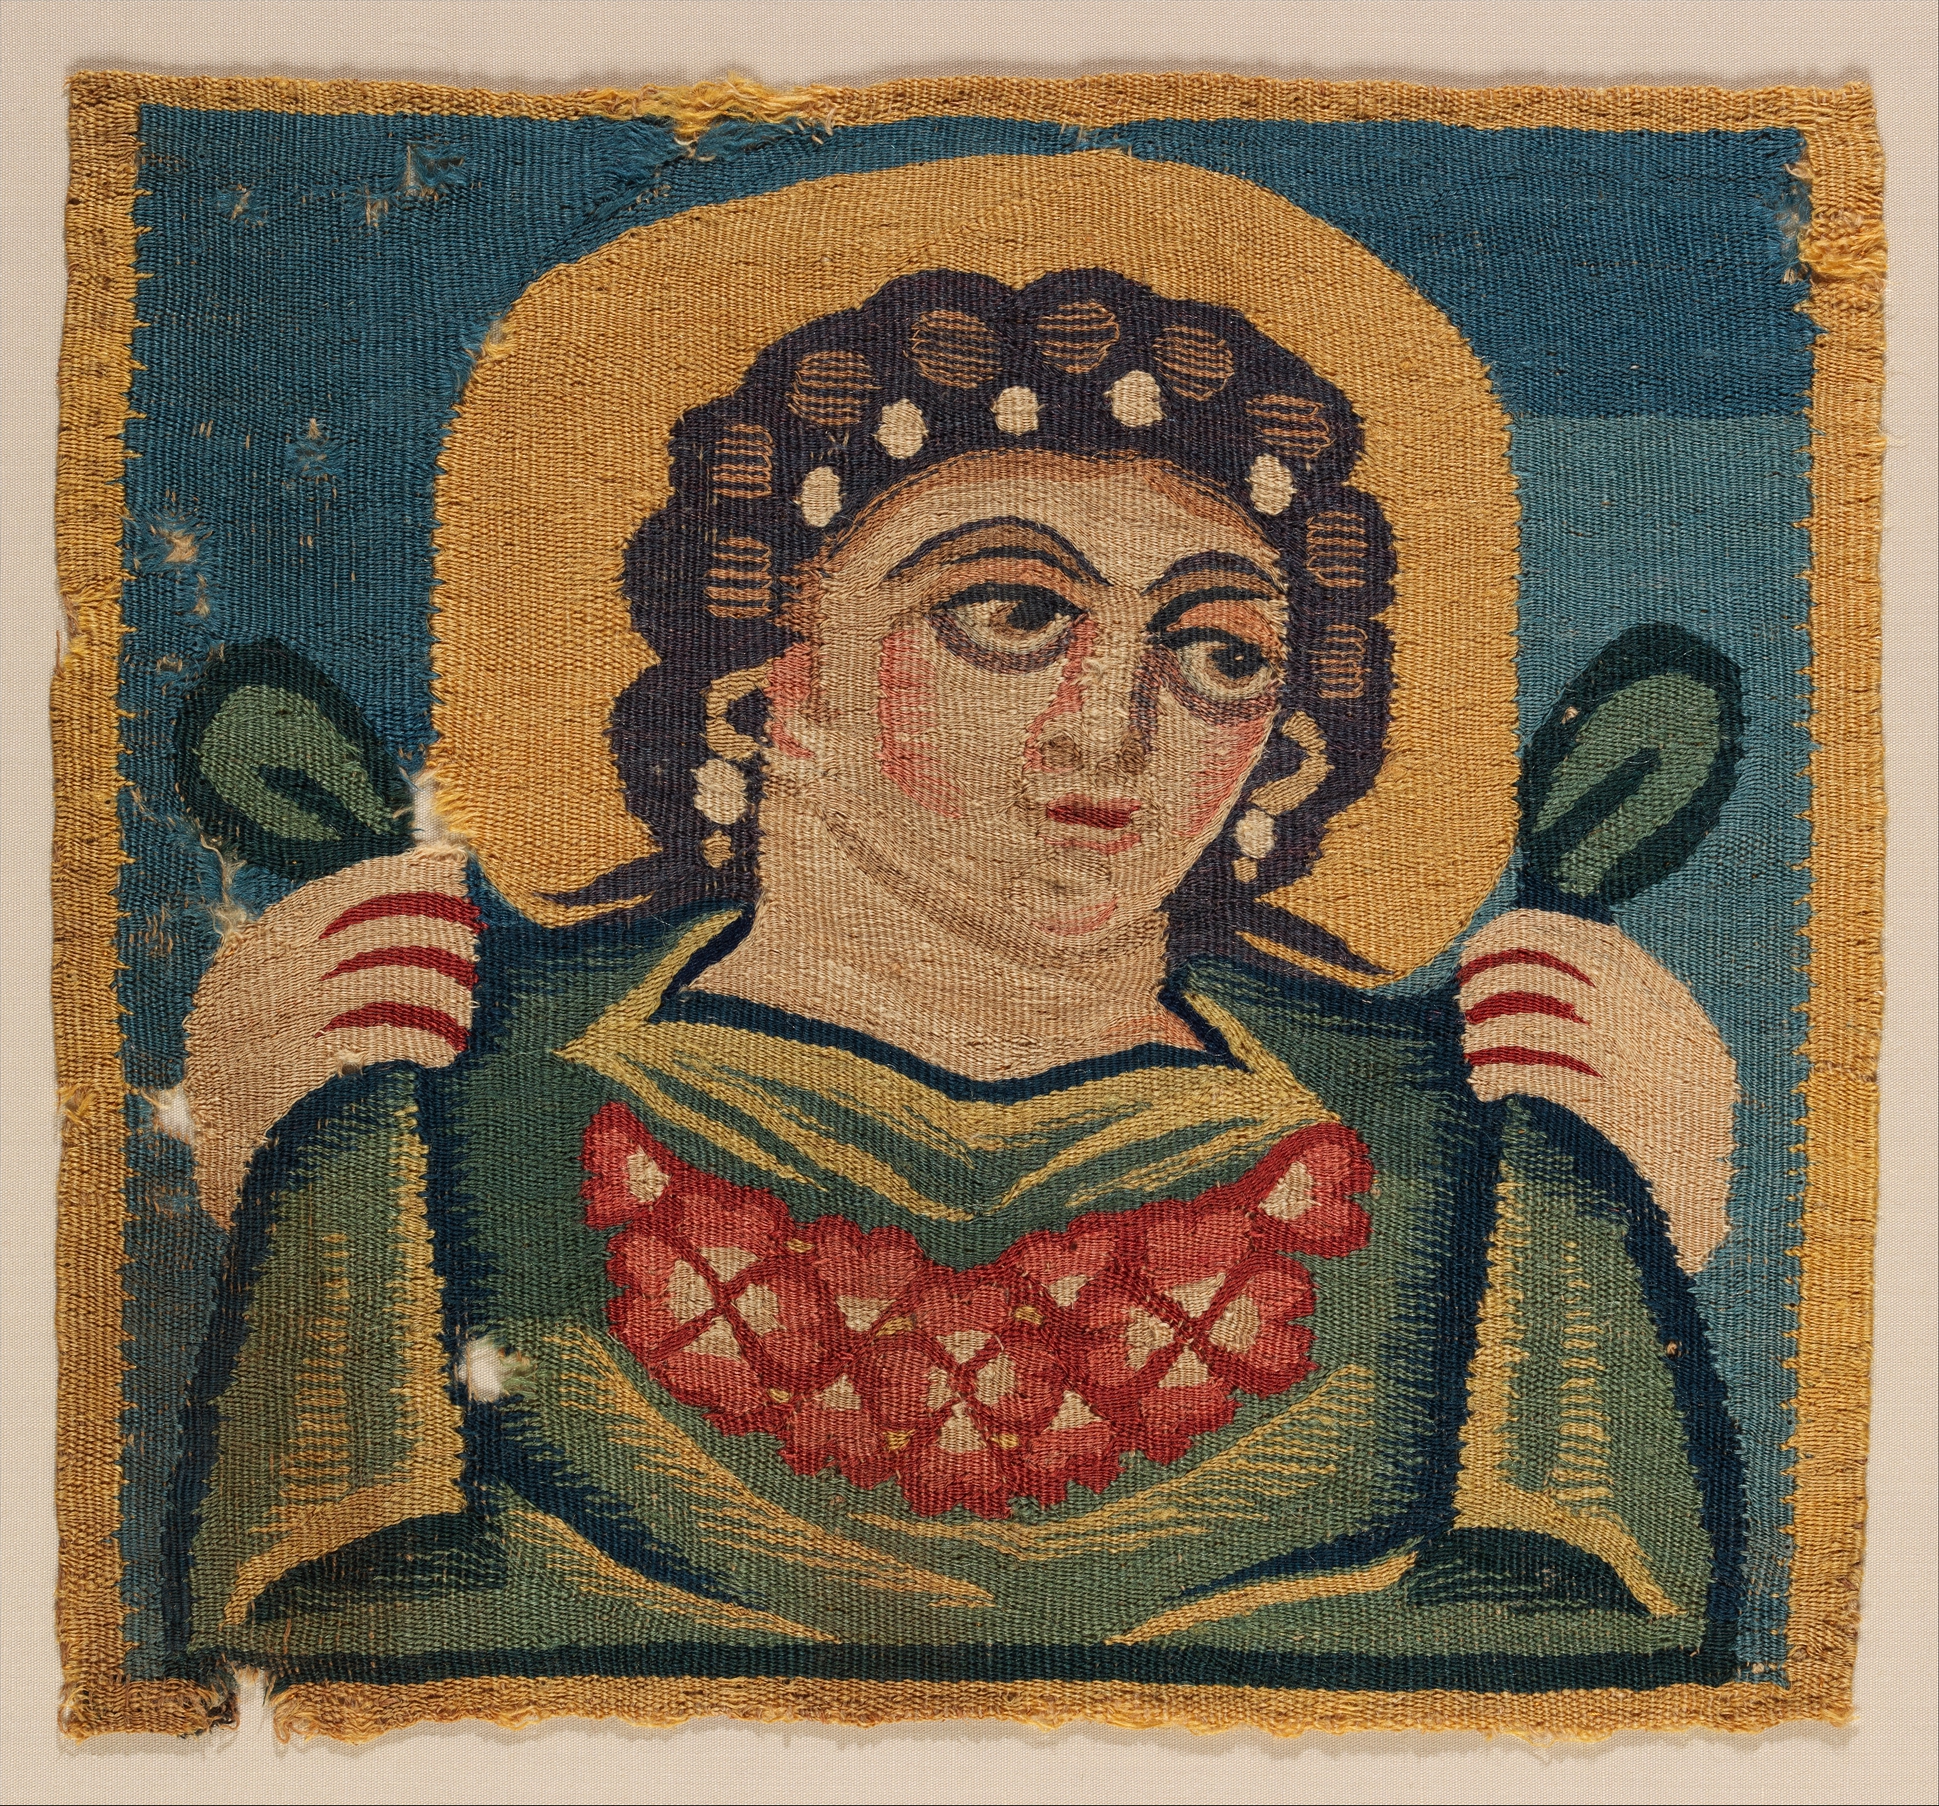 Tabula (Square) With the Head of Spring by Unknown Artist - 5th–7th century - 23.5 x 25 cm Metropolitan Museum of Art